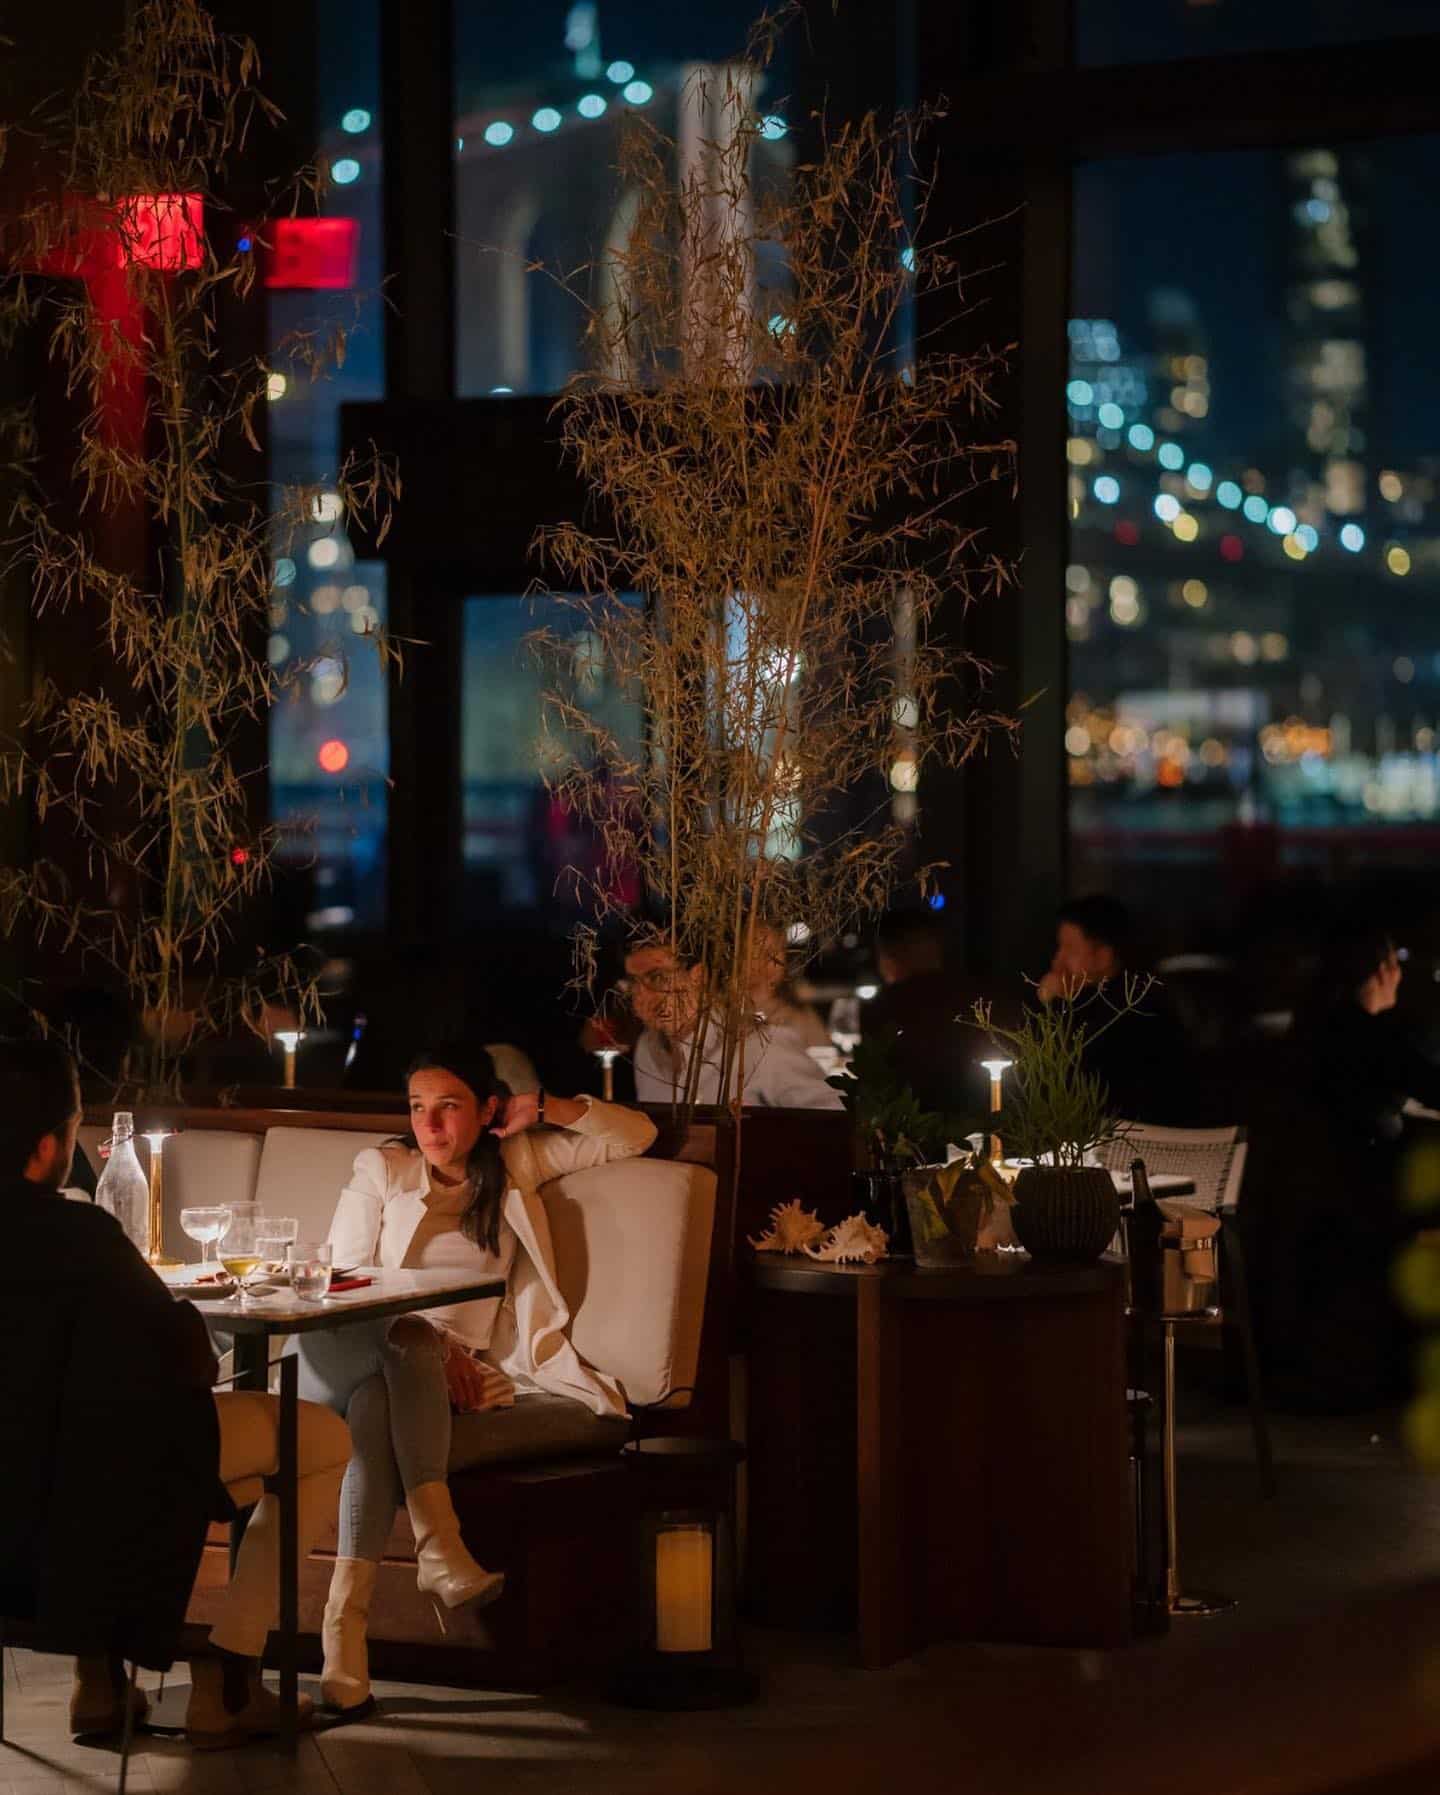 Dinner with a view. 
Drinks with friends.
Unlimited culinary experiences.
Reservations ➤ link in bio.